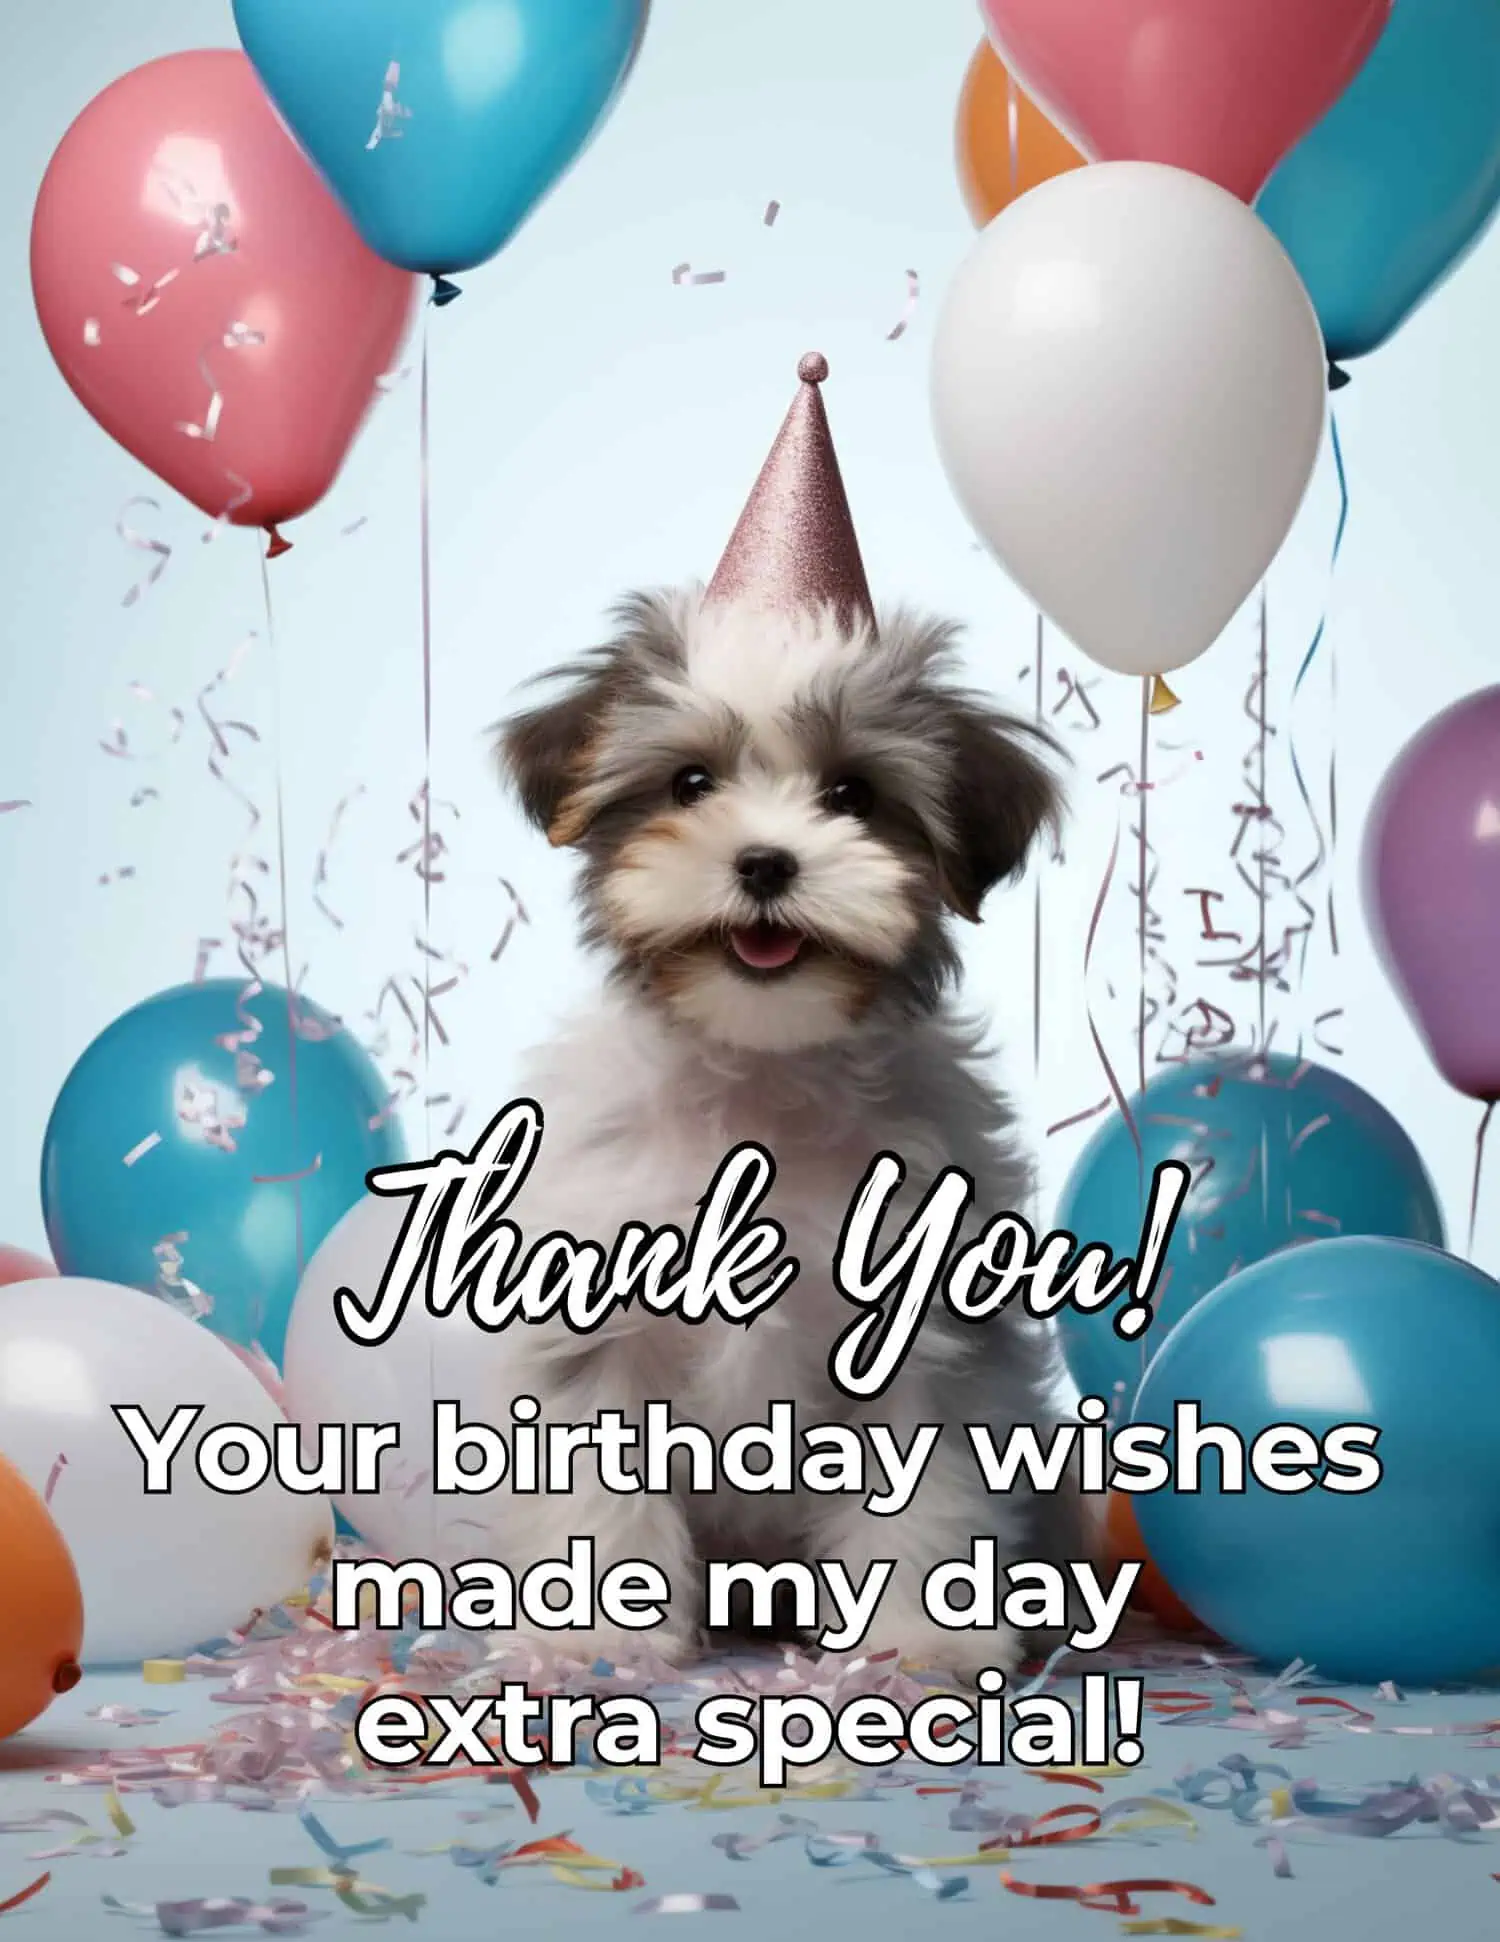 A collection of  unique and heartfelt messages to express gratitude for birthday wishes.